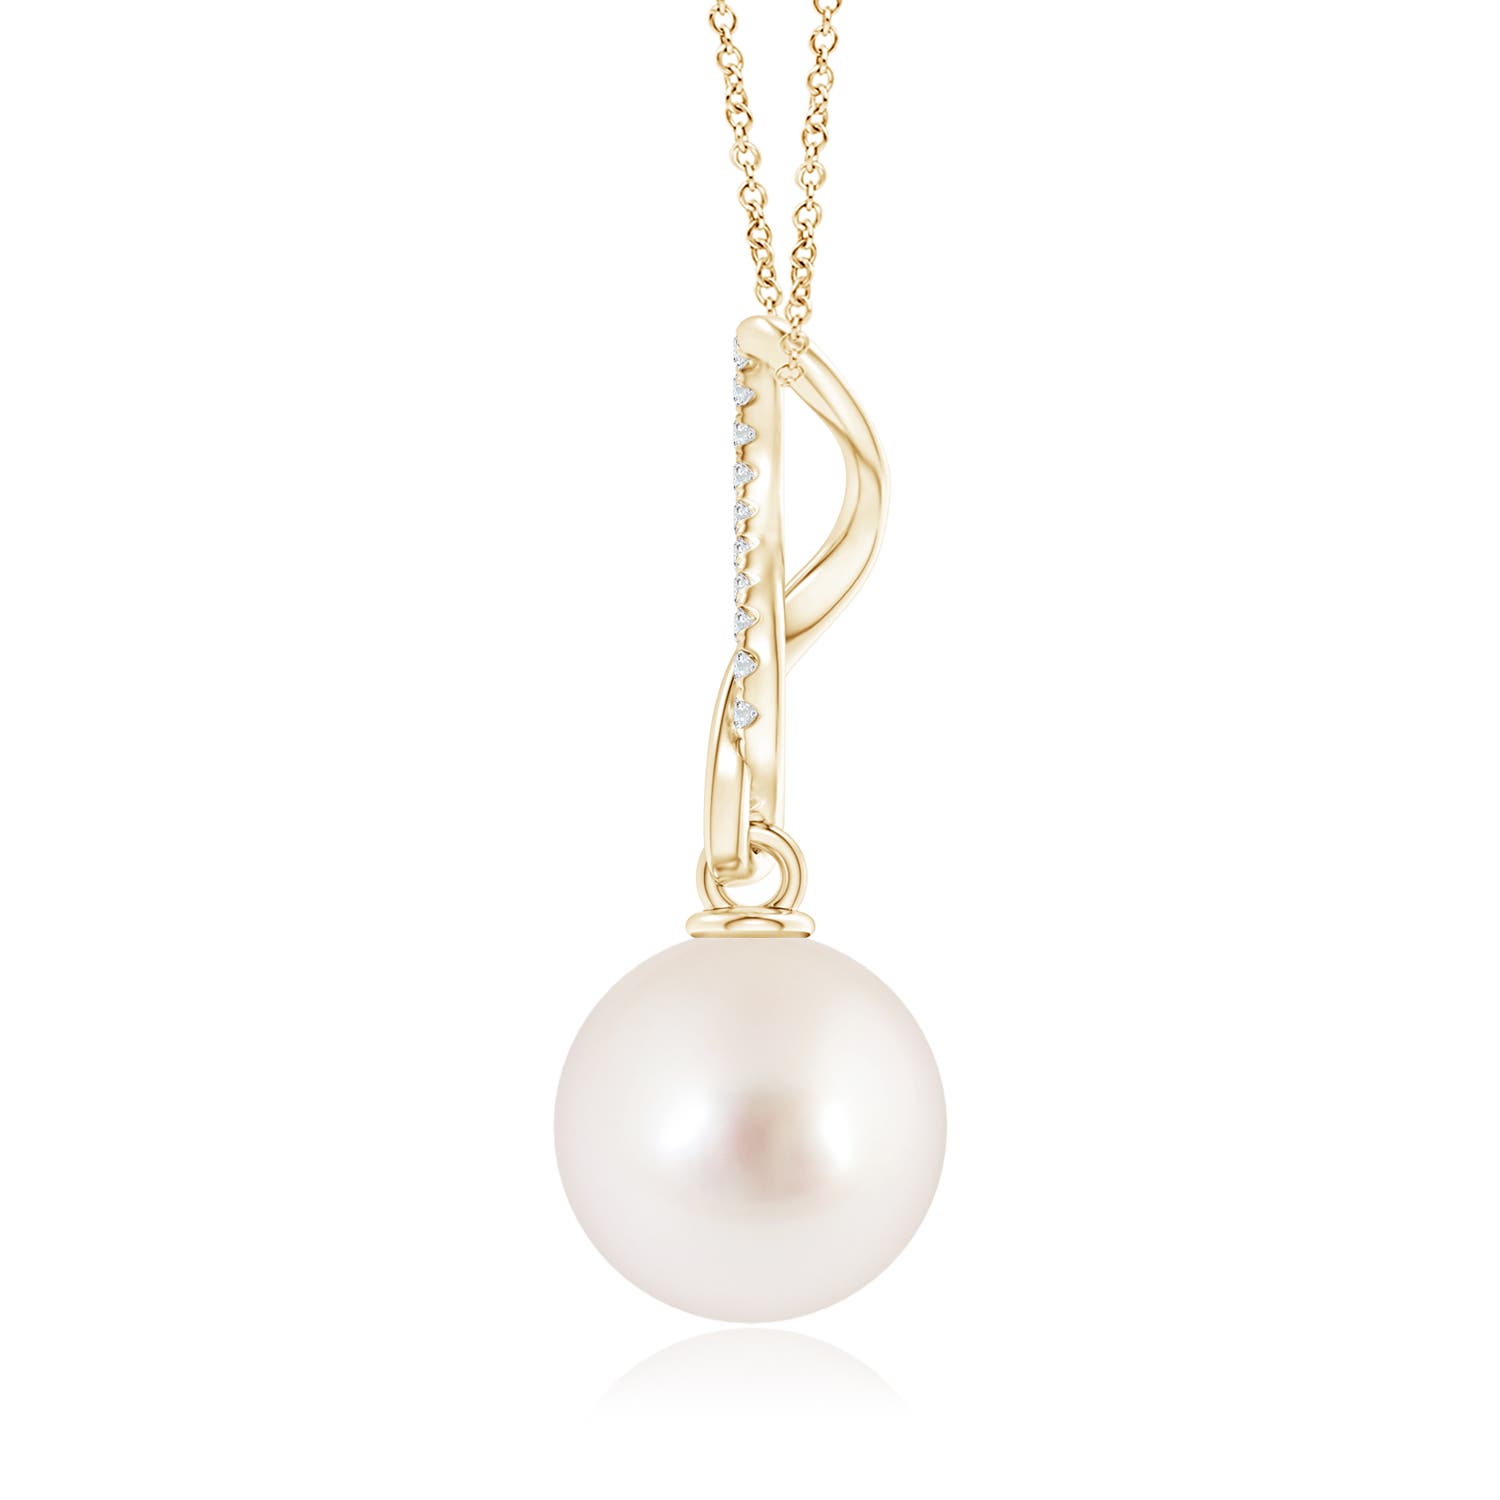 AAAA - South Sea Cultured Pearl / 7.26 CT / 14 KT Yellow Gold